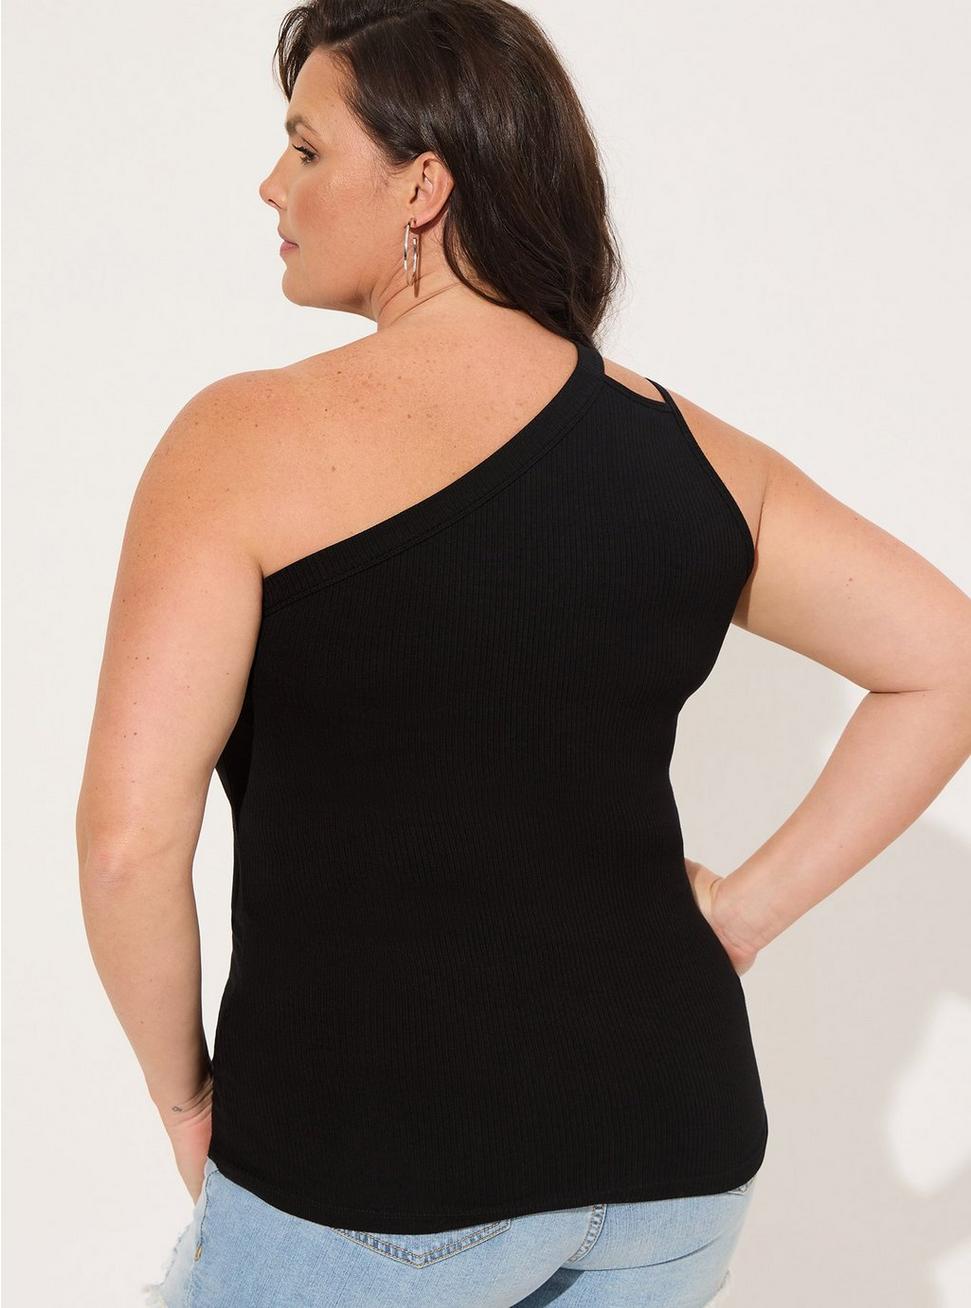 Plus Size Everyday Rib One Shoulder Cut Out Cami, DEEP BLACK, alternate